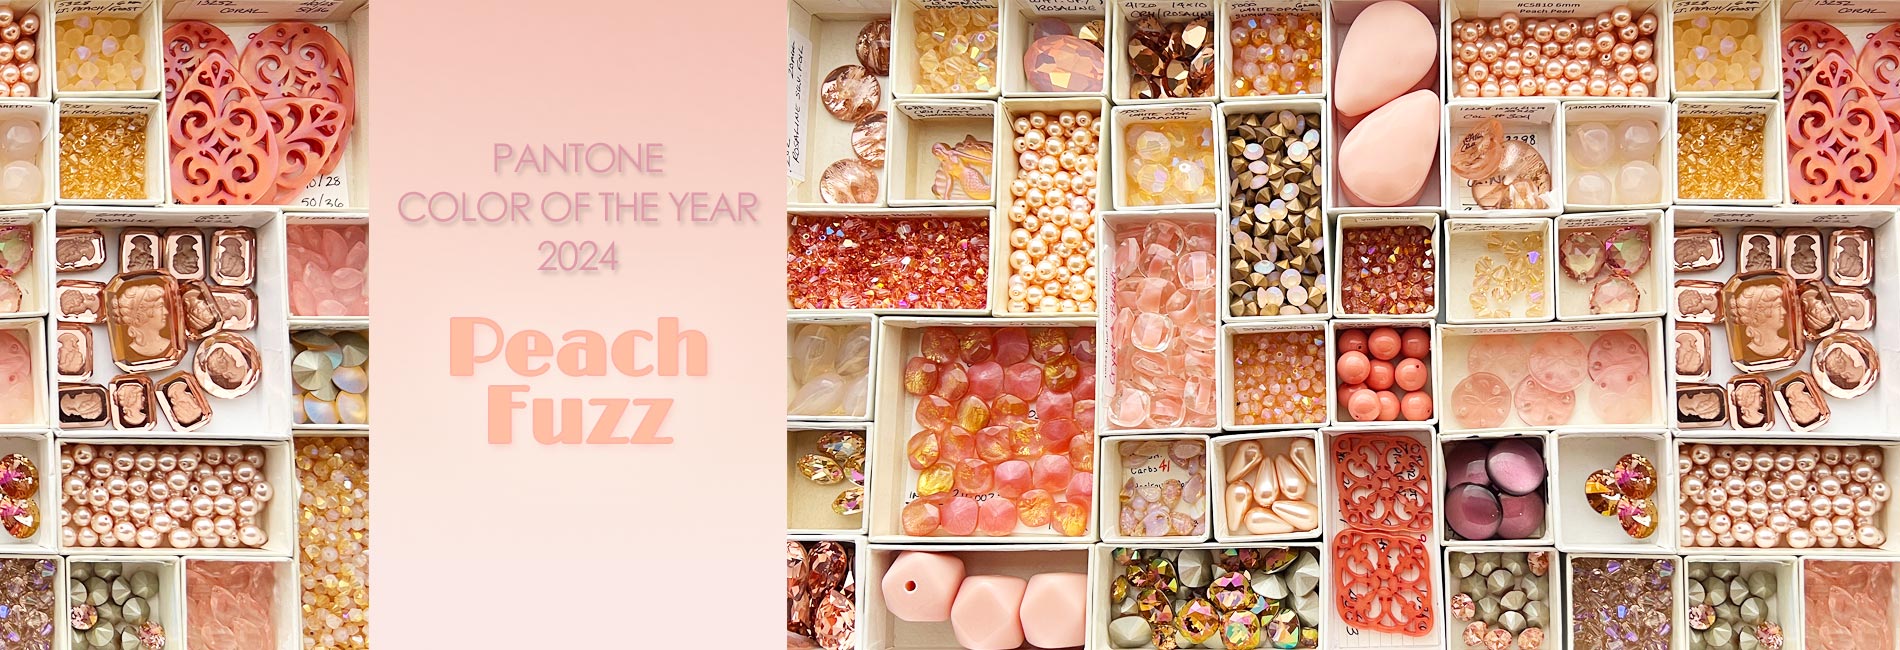 Pantone Color of the Year 2024 Peach Fuzz as seen through our eyes and spectrum of colors